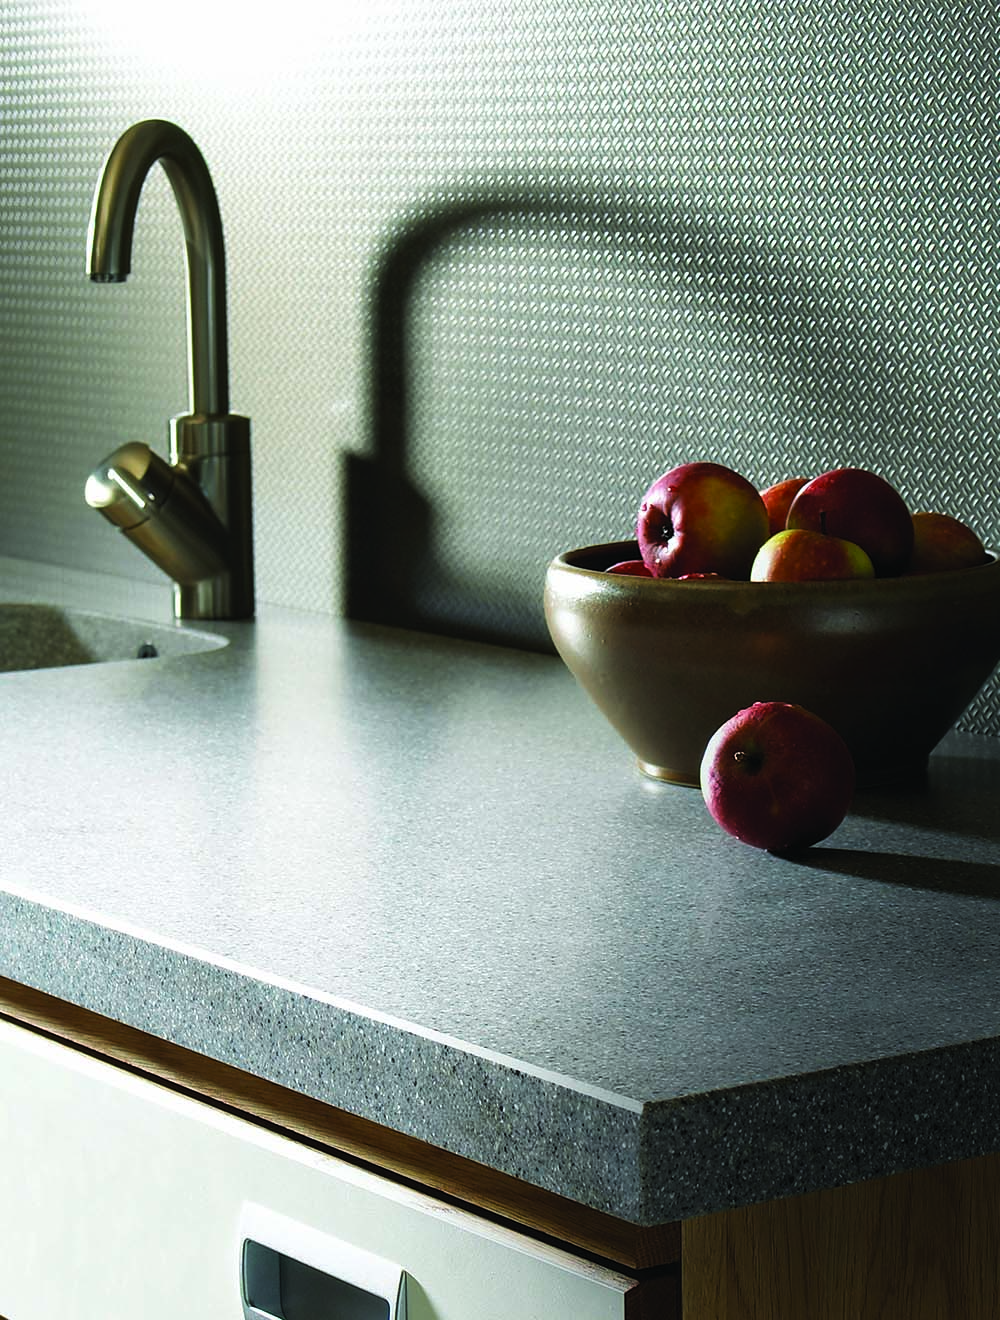 NuMetal_Kitchen_Brushed_Stainless_Diamond_Plate_924_GEK